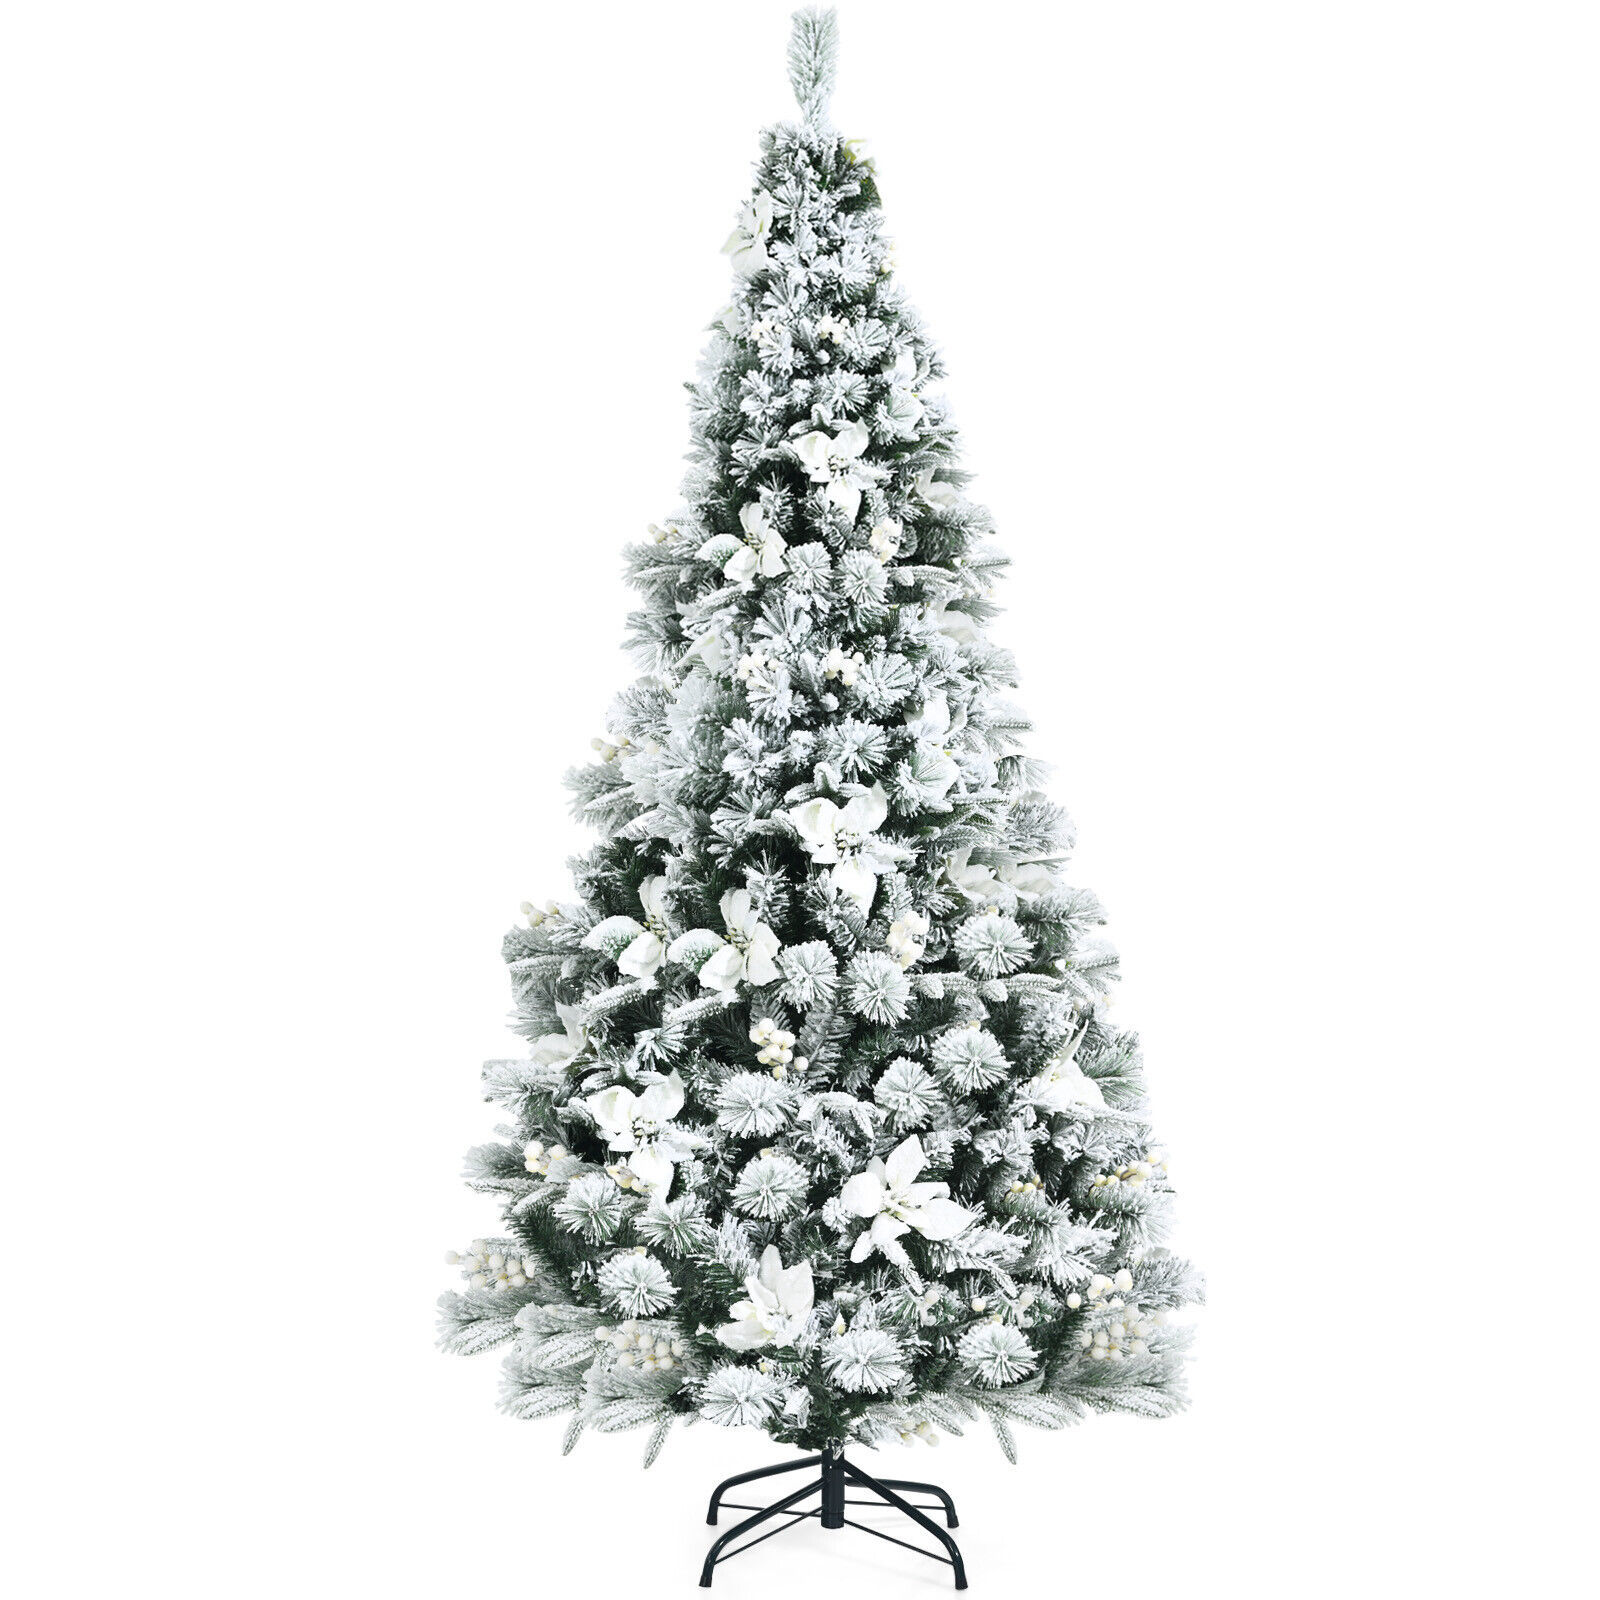 Primary image for Costway 6ft Snow Flocked Hinged Christmas Tree w/ Berries & Poinsettia Flowers